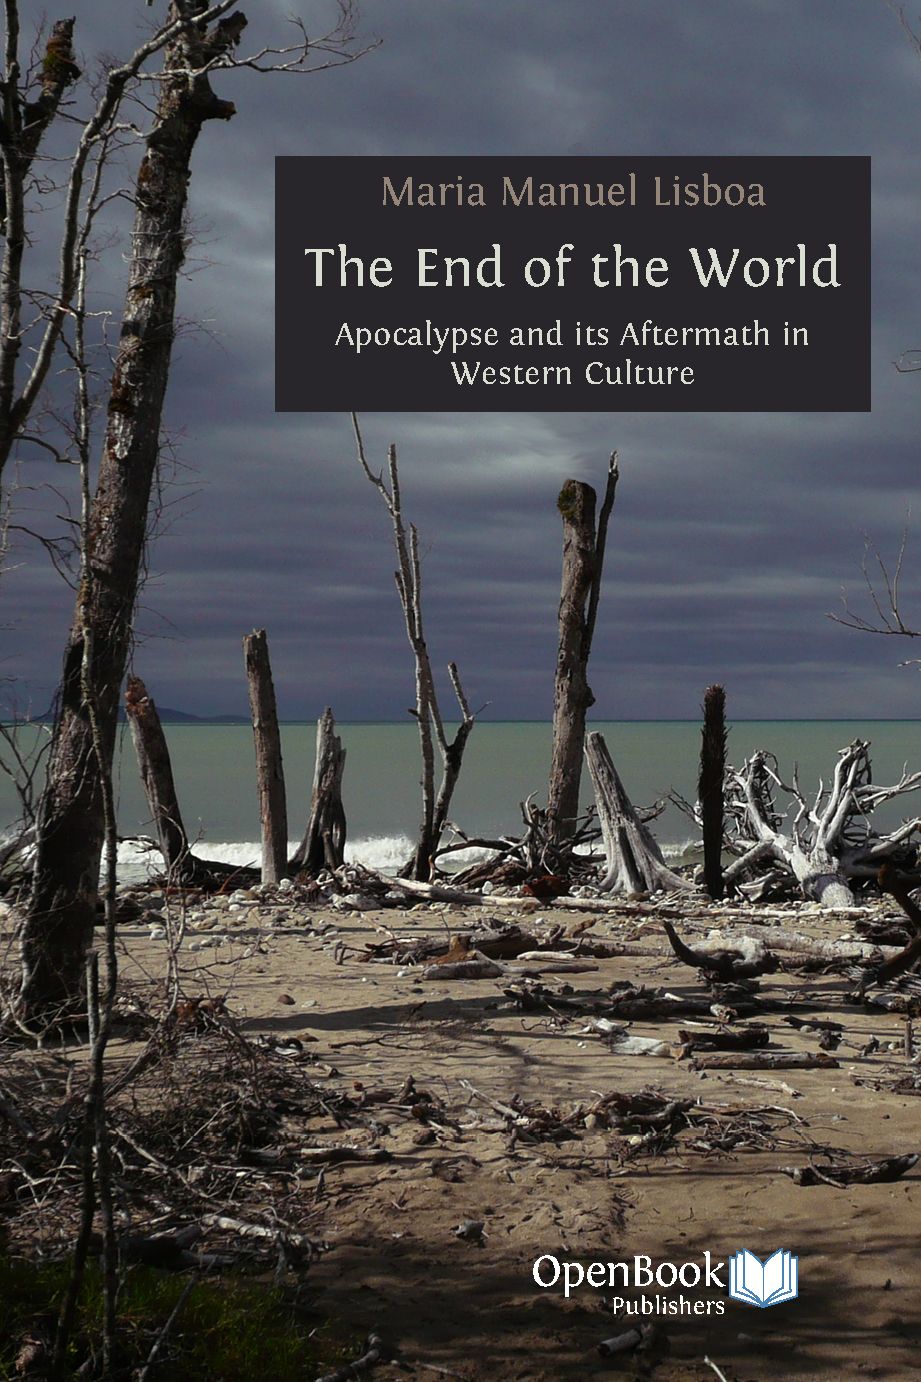 The End of the World: ten years later